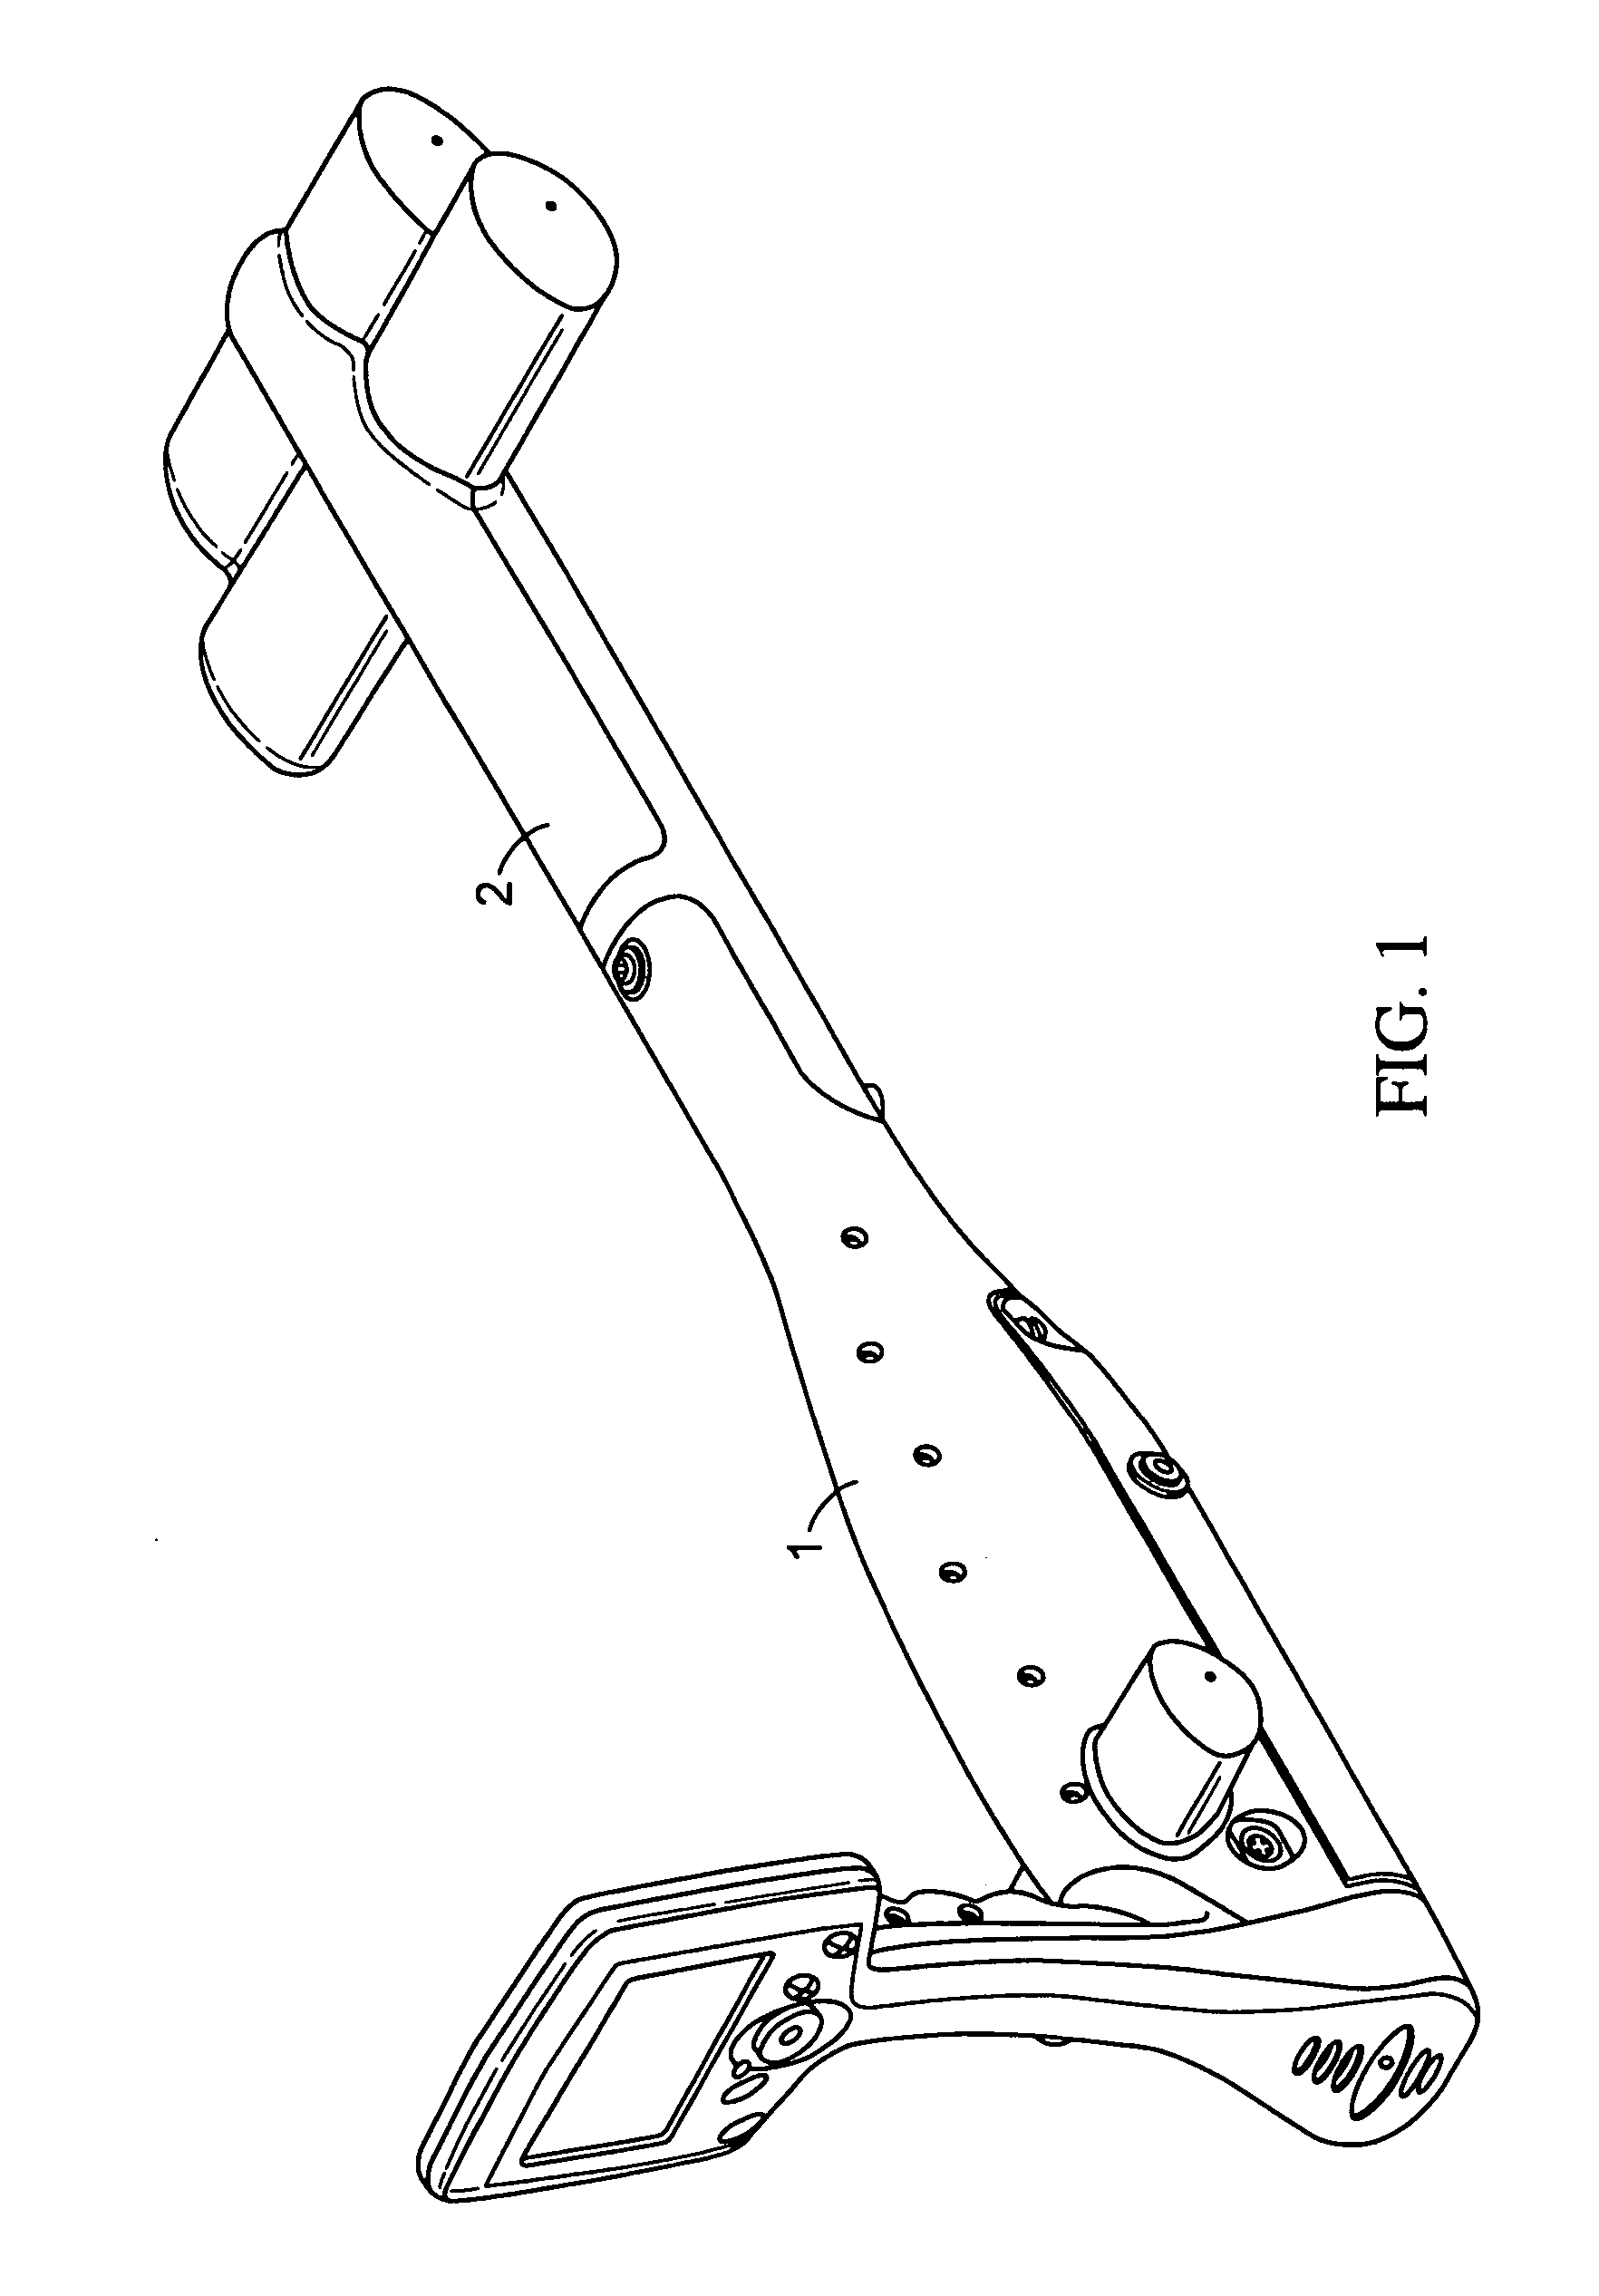 Locator with removable antenna portion